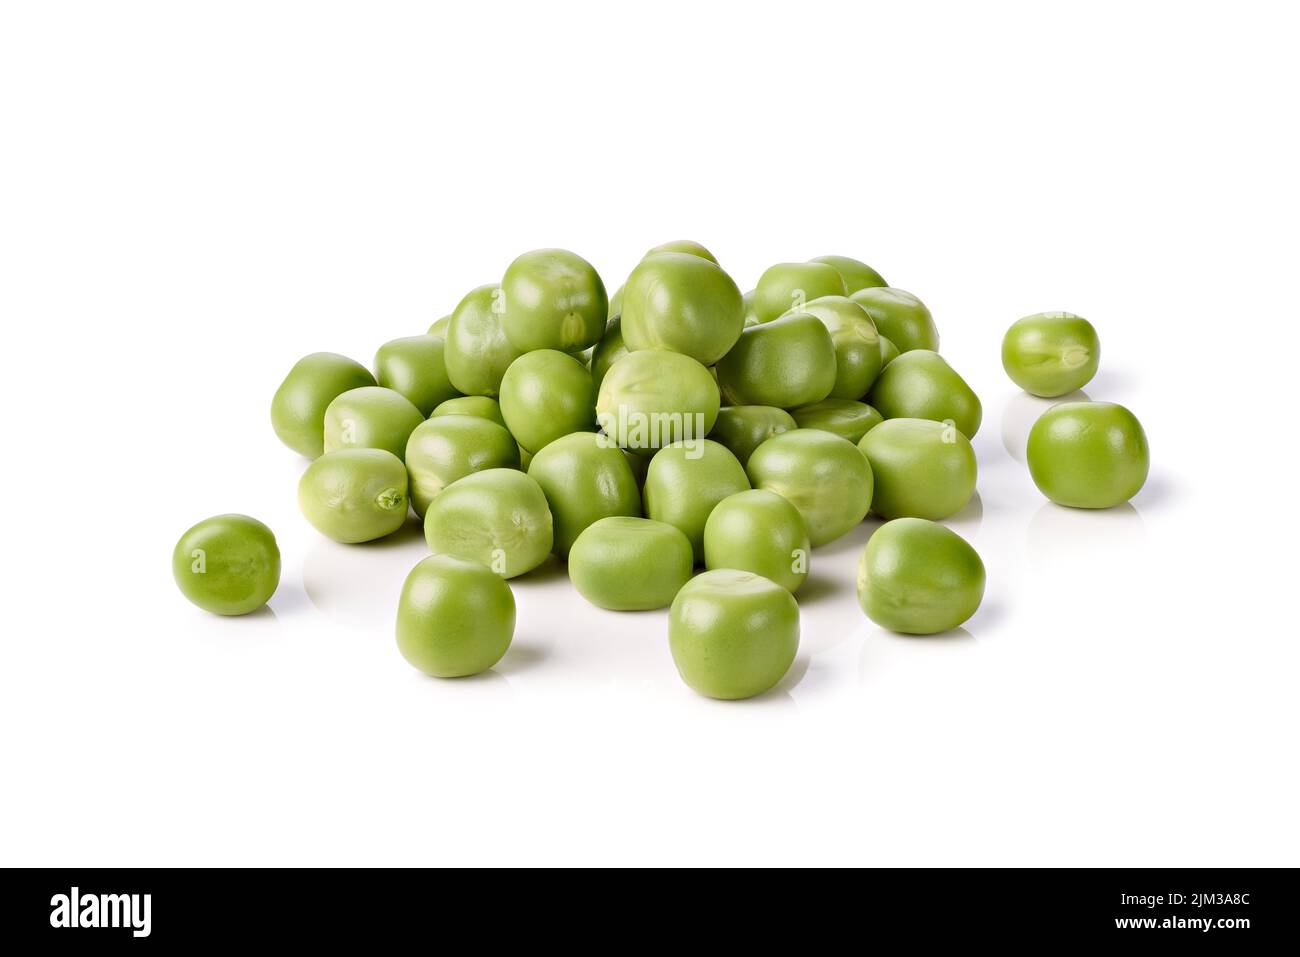 Heap of raw peas on white background with clipping path Stock Photo